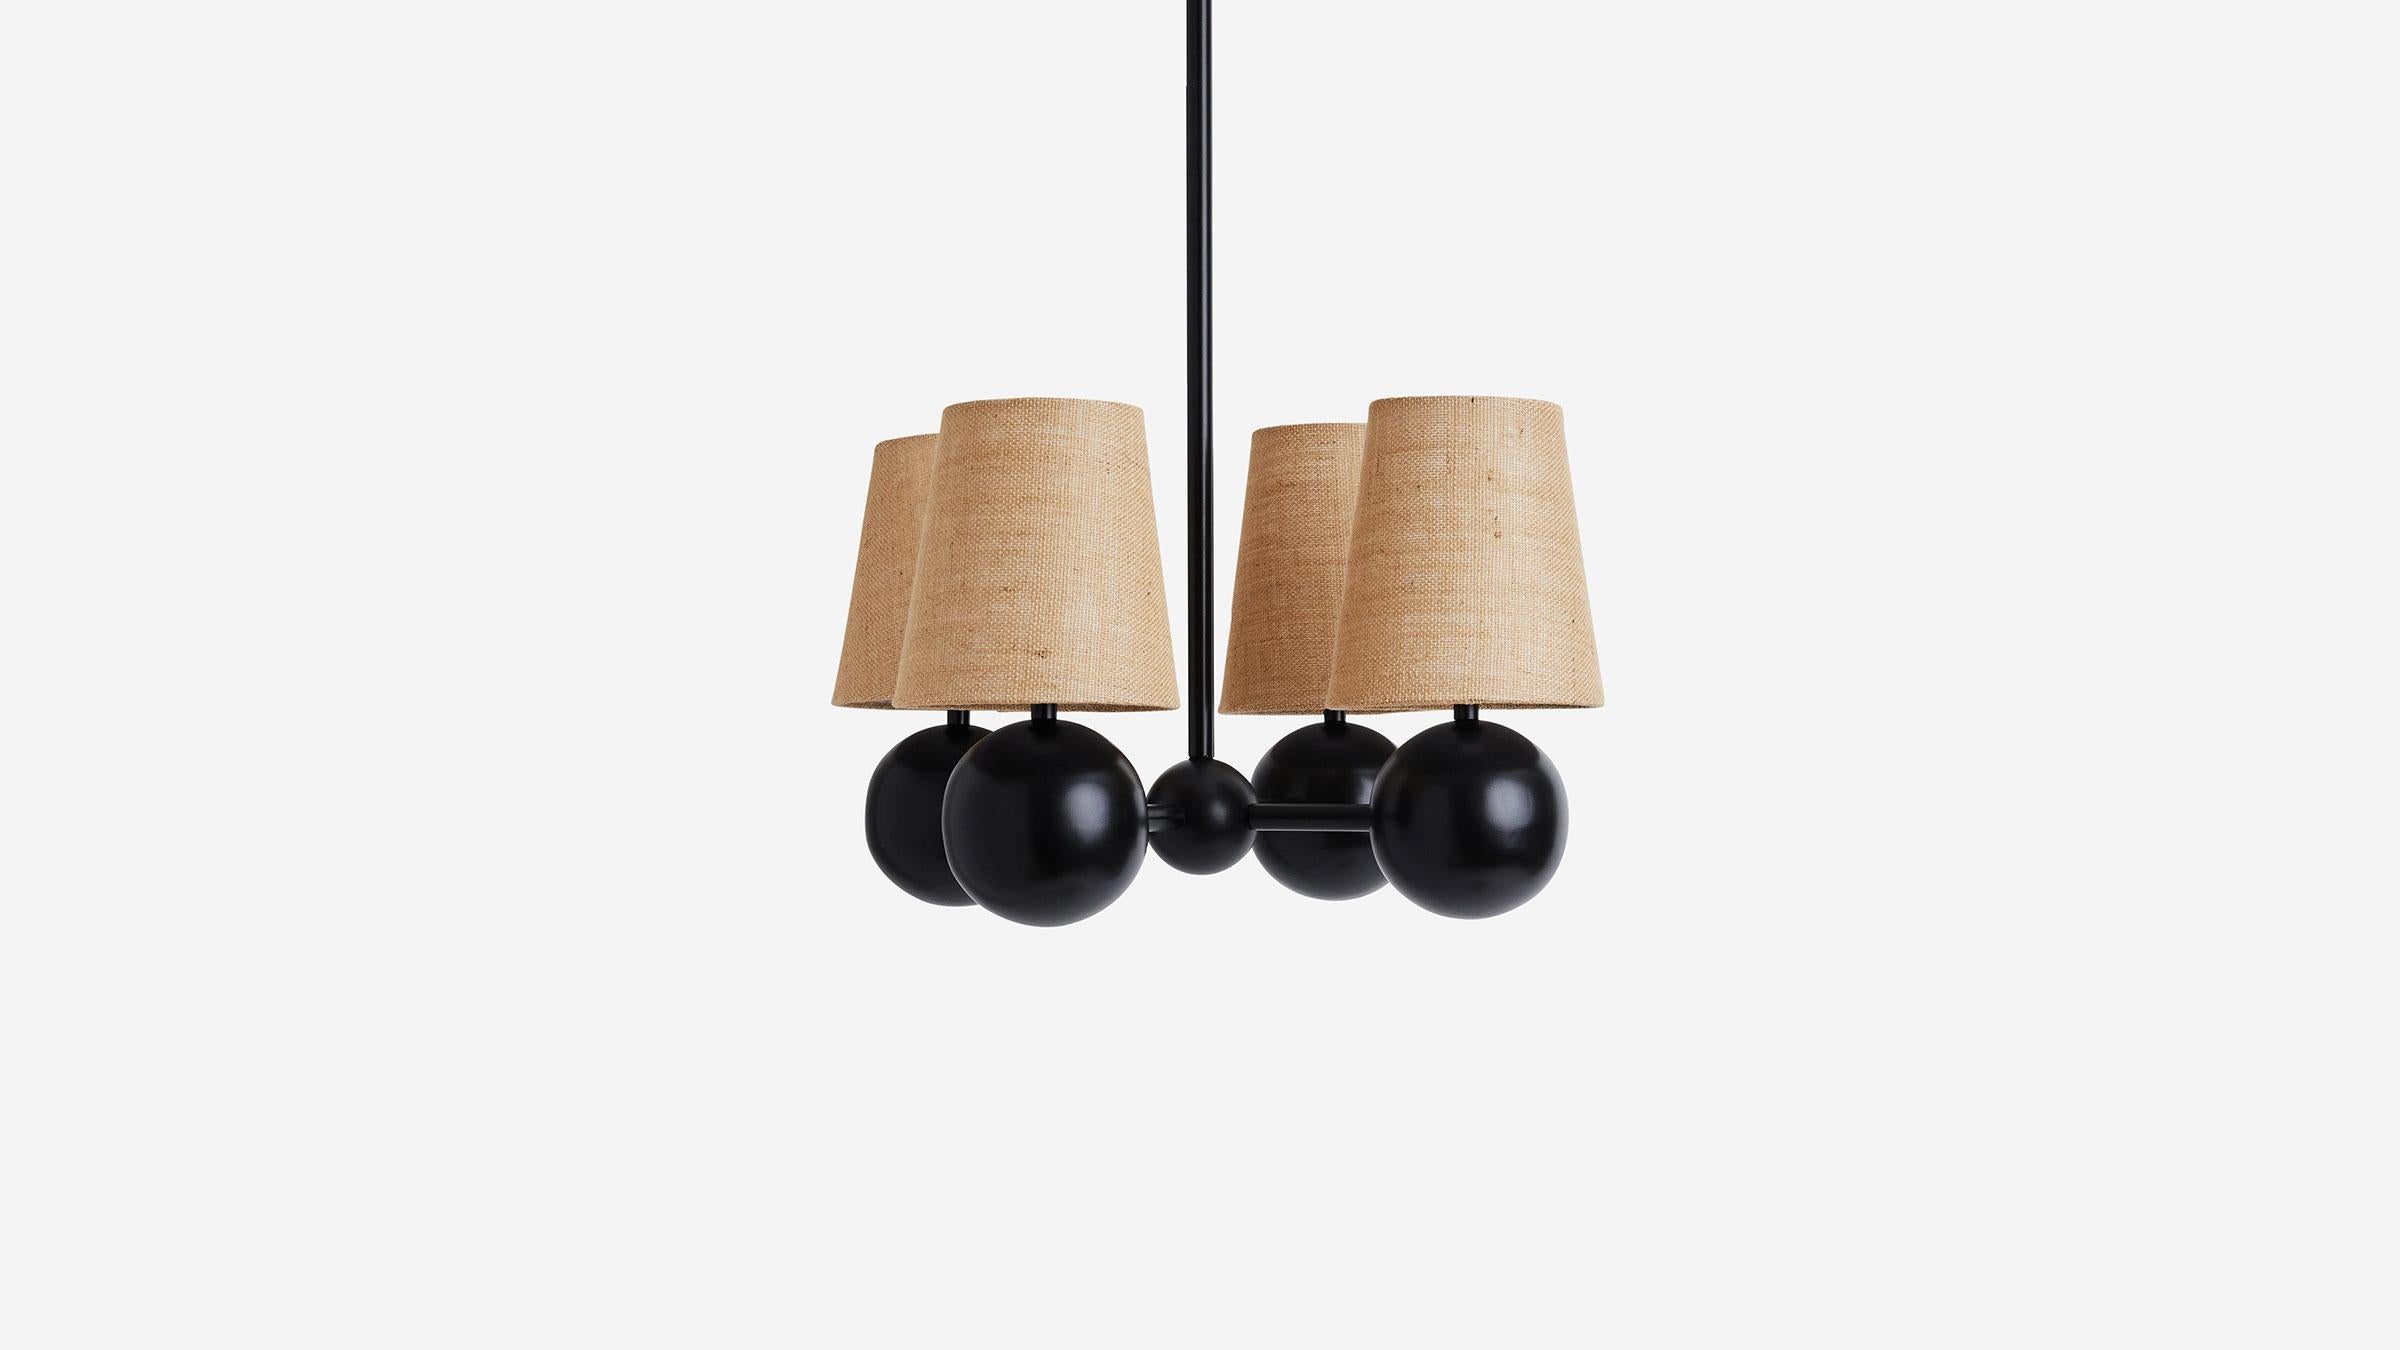 BOLE PENDANT IV floats four robust spheres and their hovering shades pulled together by a substantial center point. Providing ample amounts of light this fixture brings both weight and levity to any dining or entertaining space. UL, cUL, CE Listed.